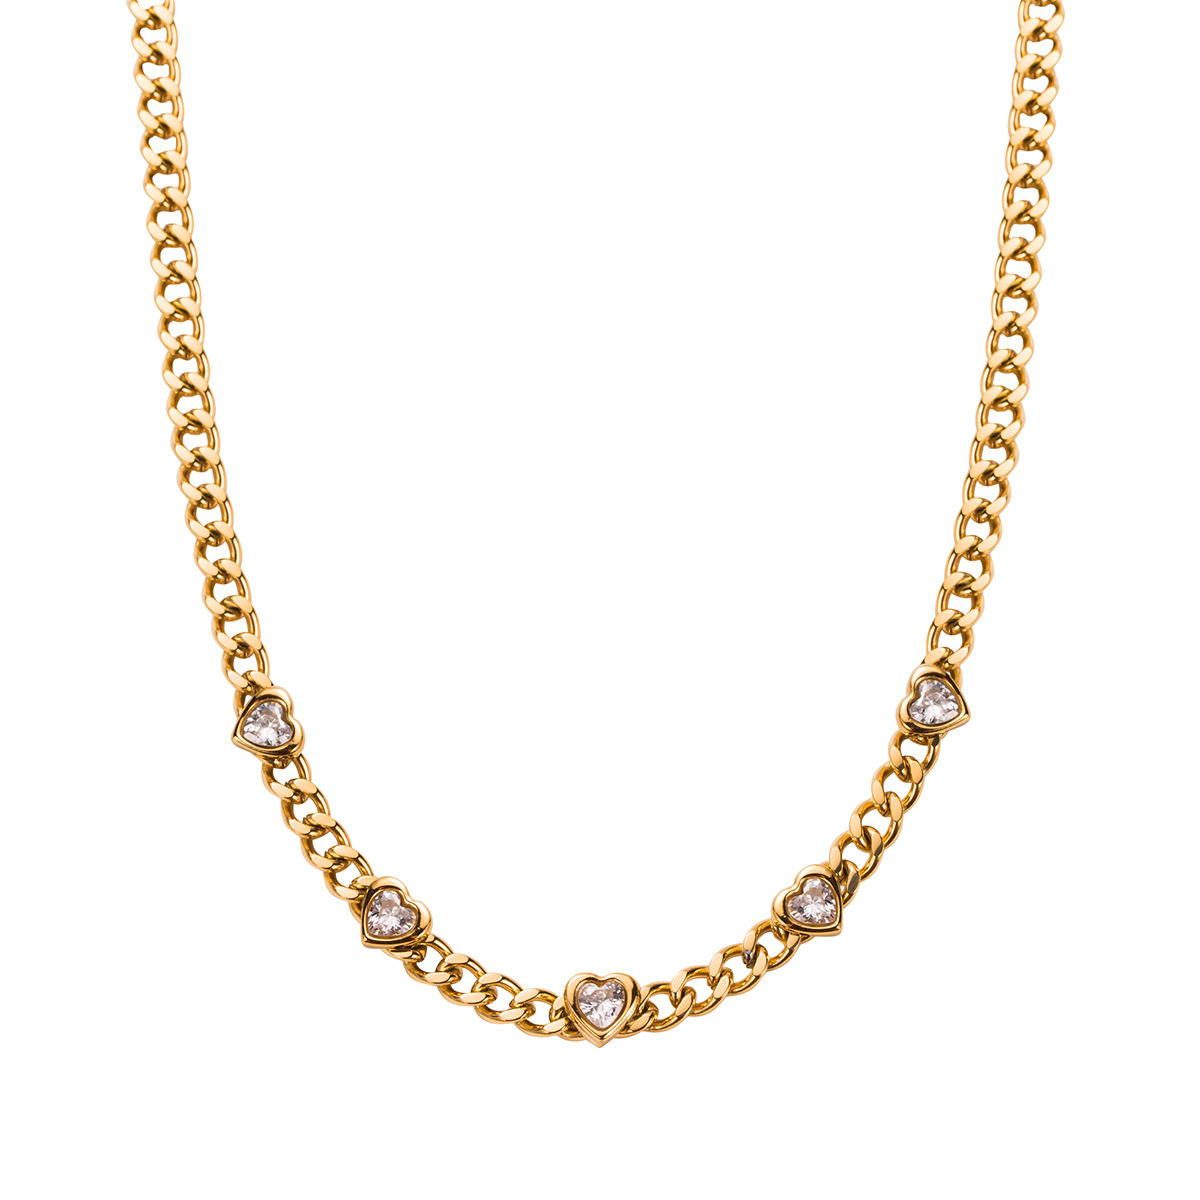 C necklace 16-18inch